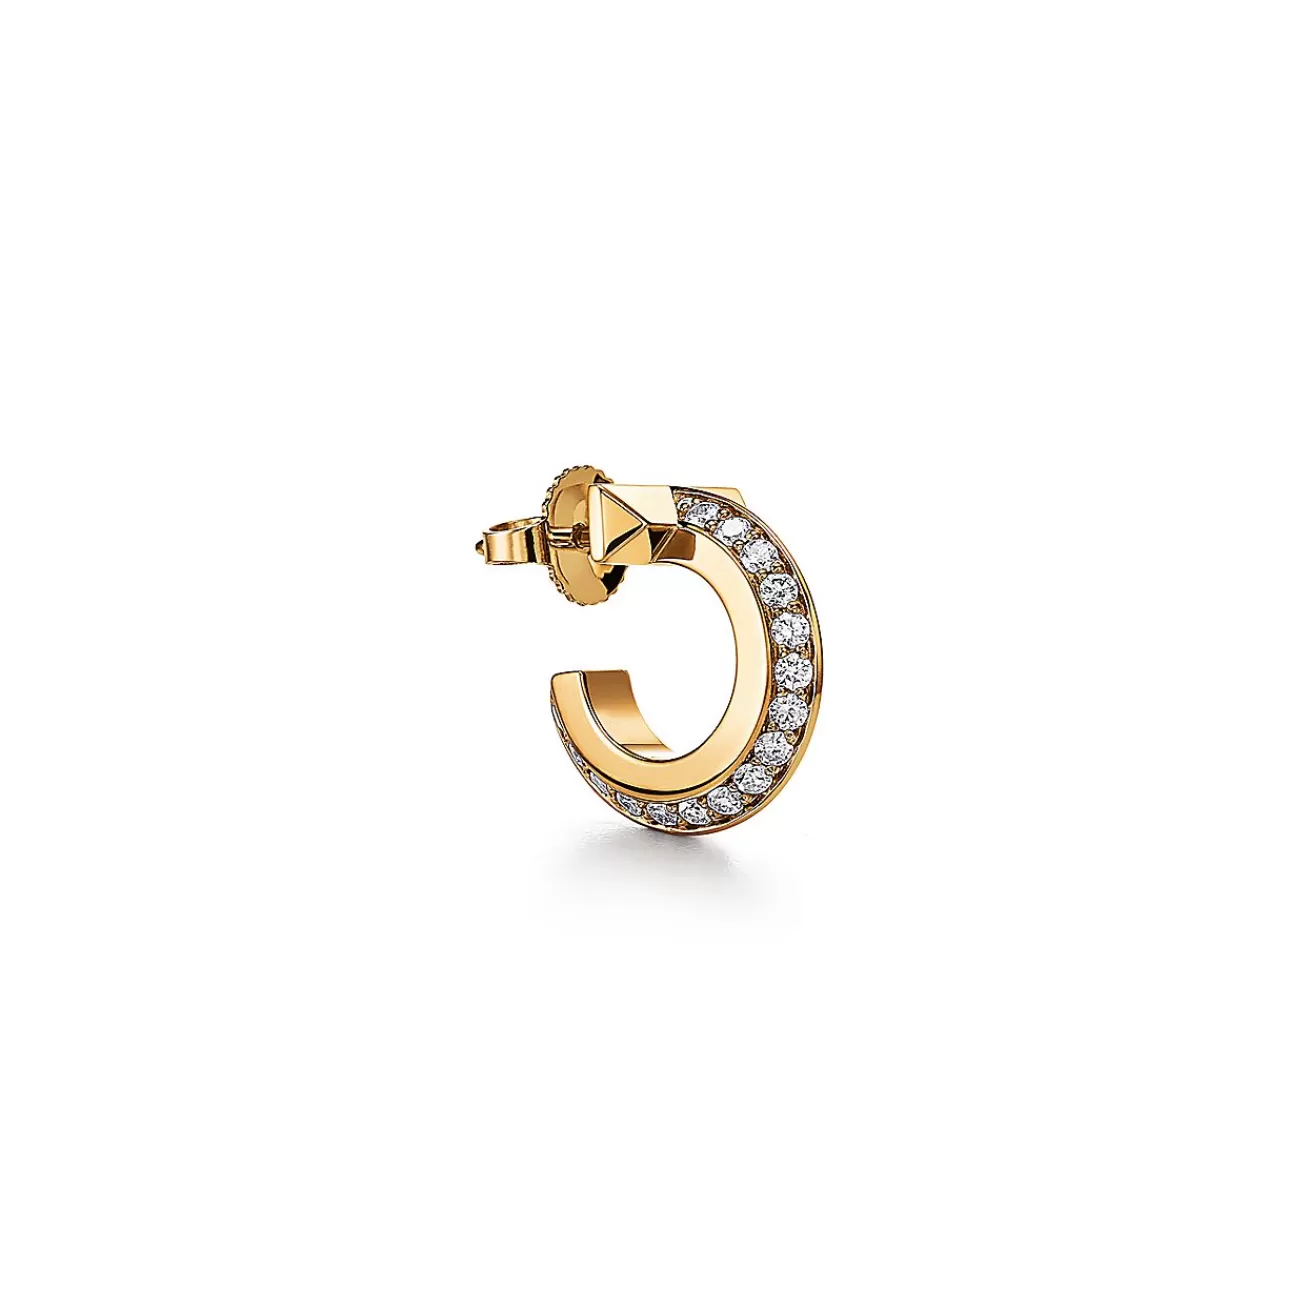 Tiffany & Co. Tiffany T T1 Hoop Earrings in Yellow Gold with Diamonds | ^ Earrings | Gifts for Her